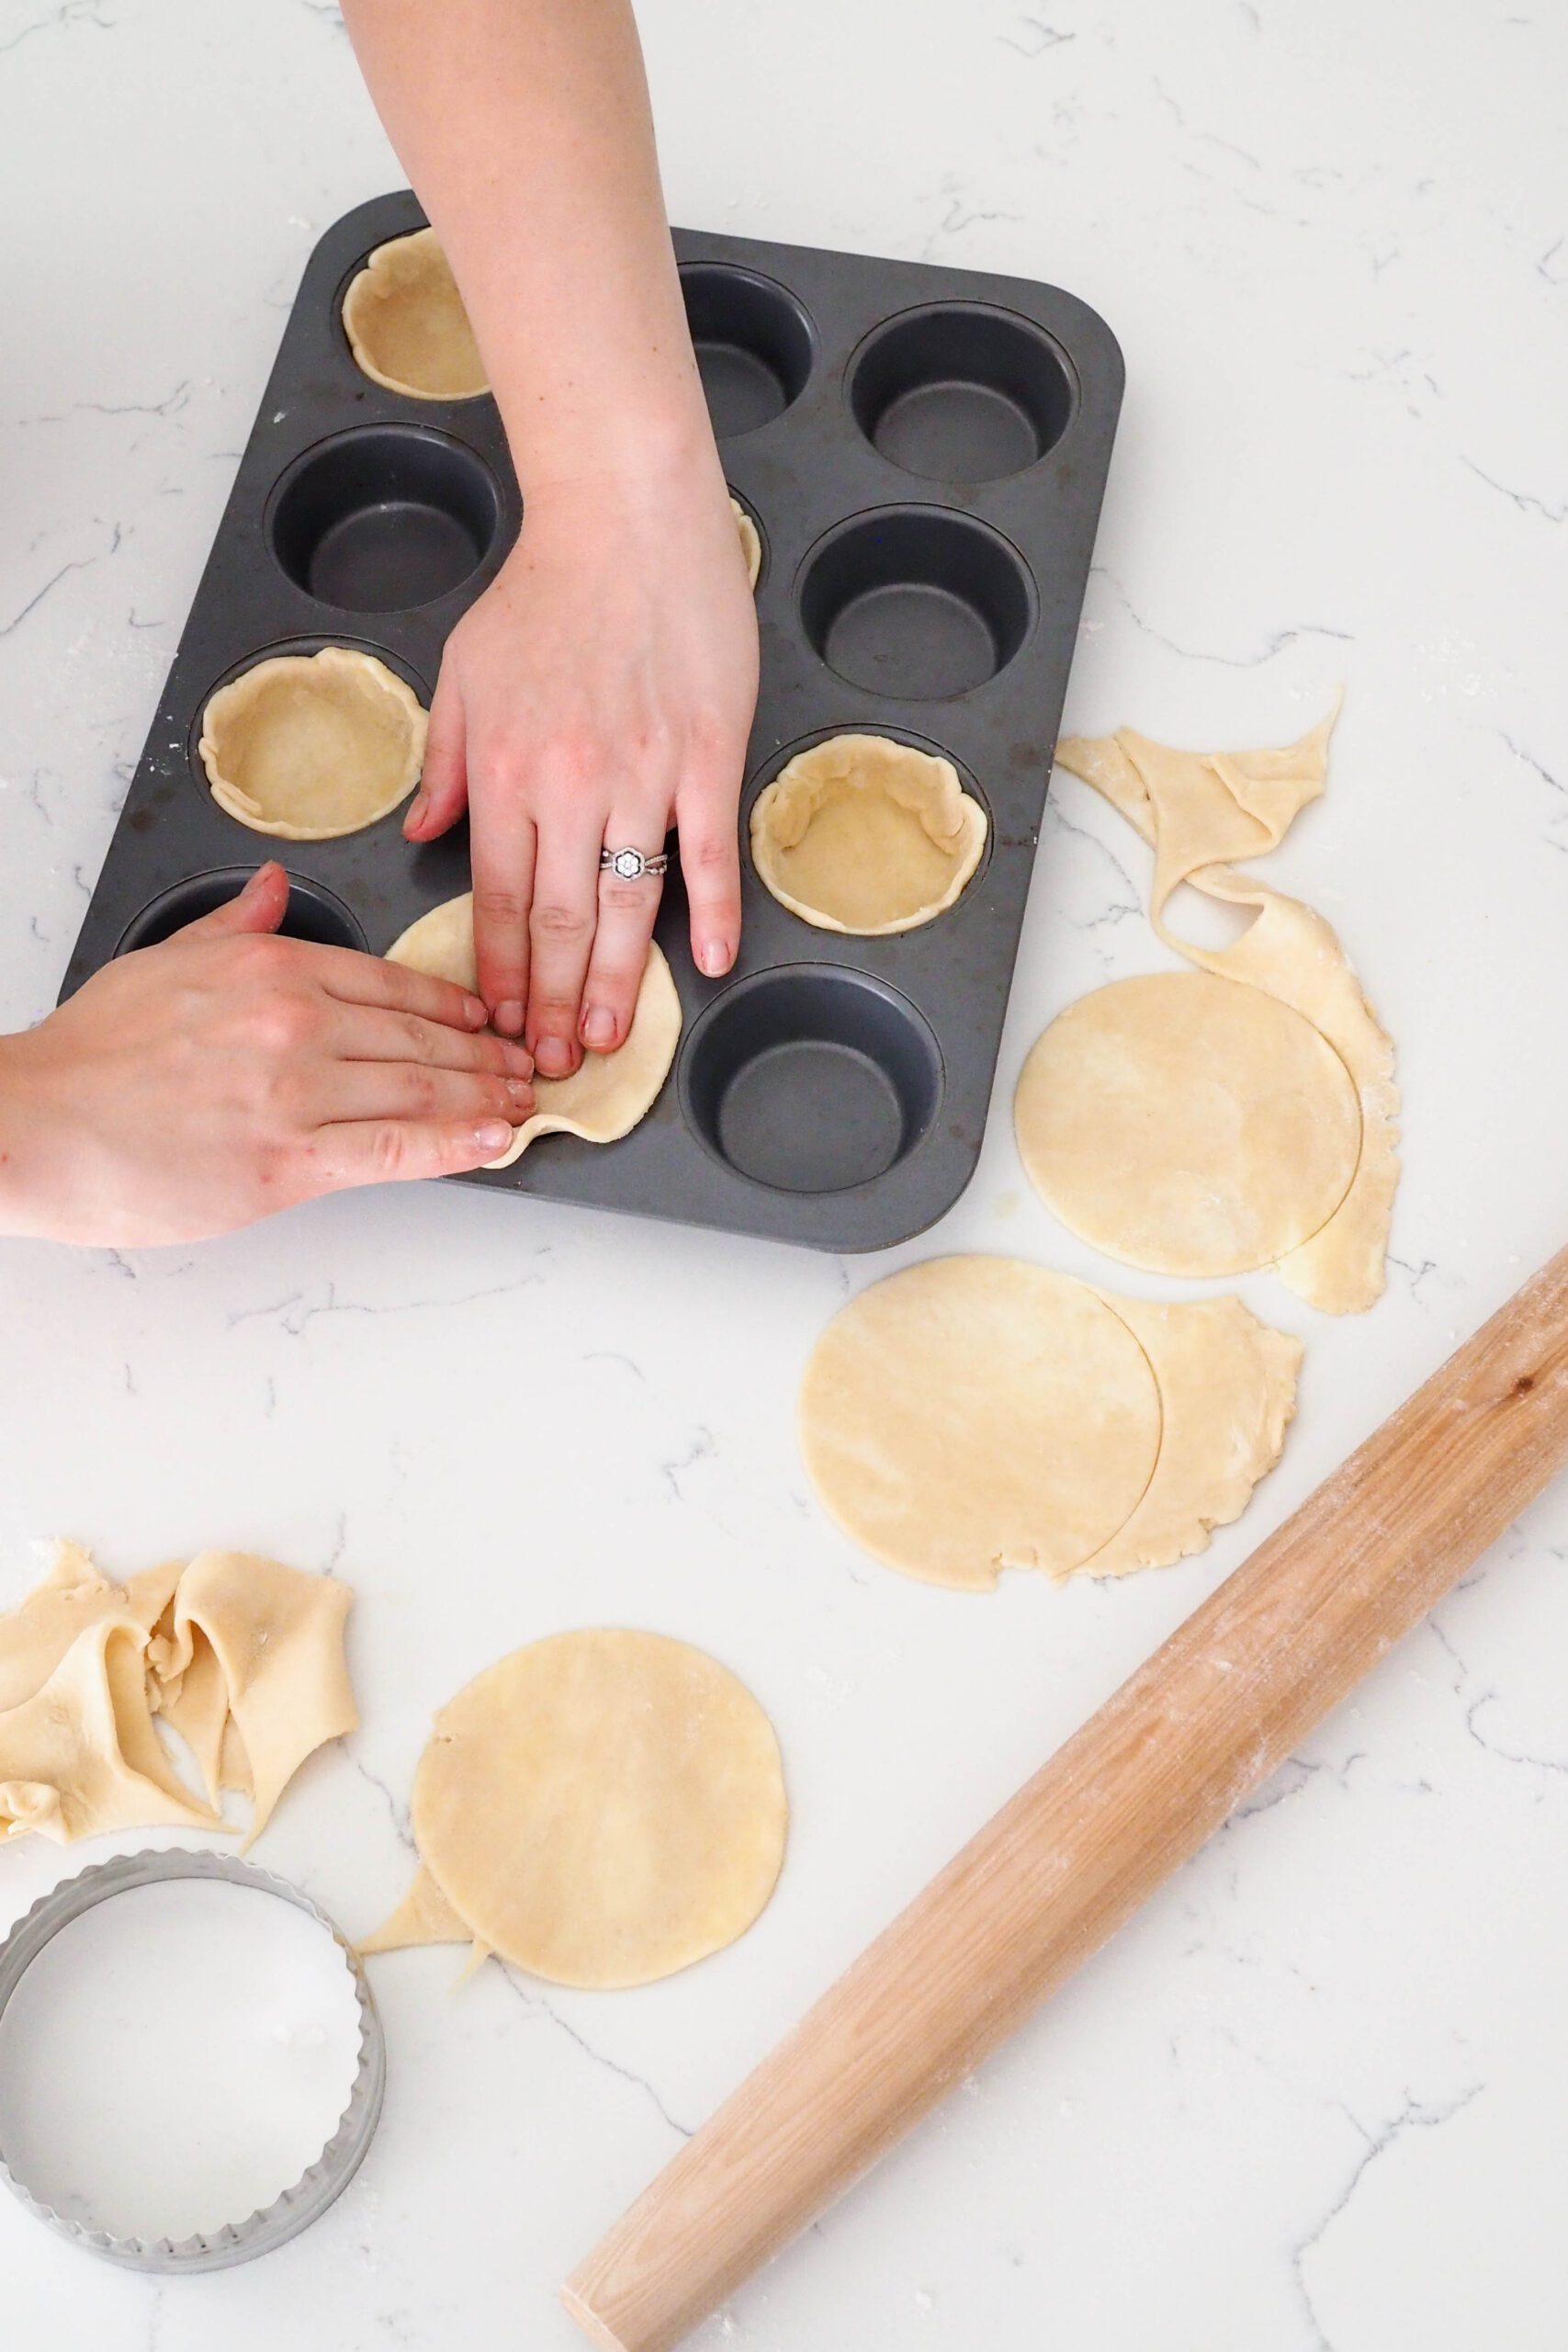 Two hands press a circle of pie dough into a muffin pan opening.